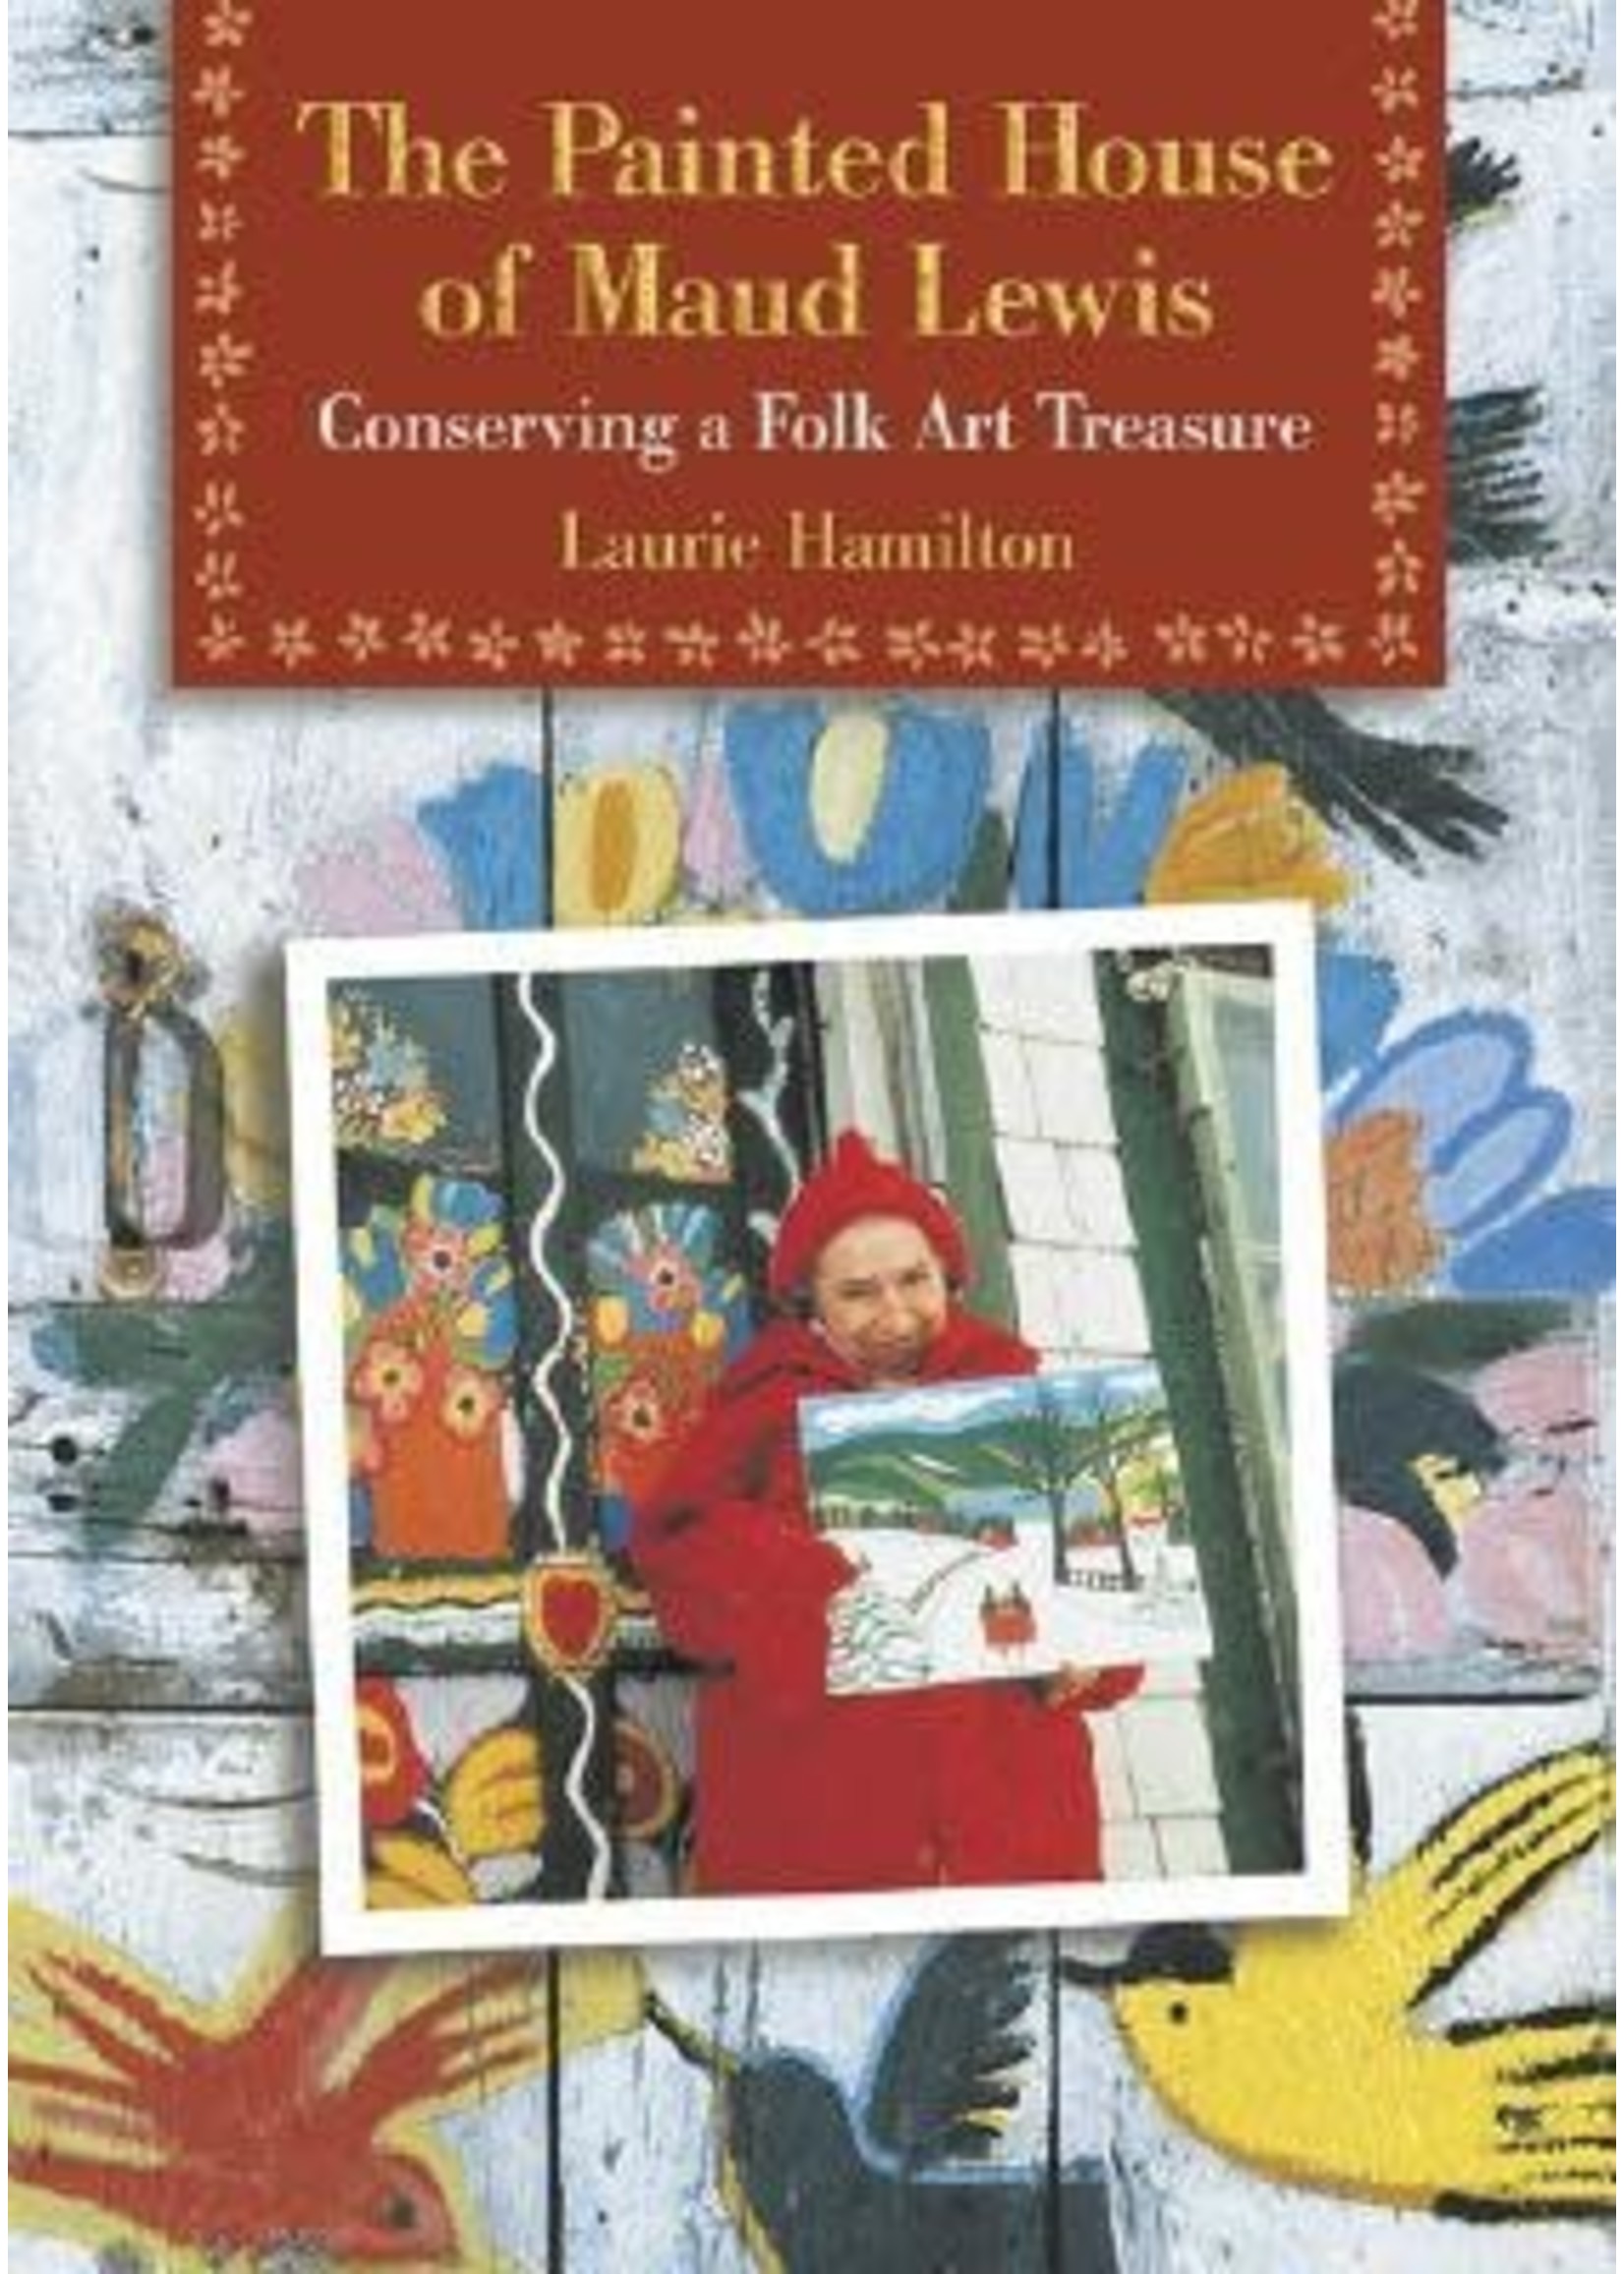 The Painted House of Maud Lewis: Conserving a Folk Art Treasure by Laurie Hamilton